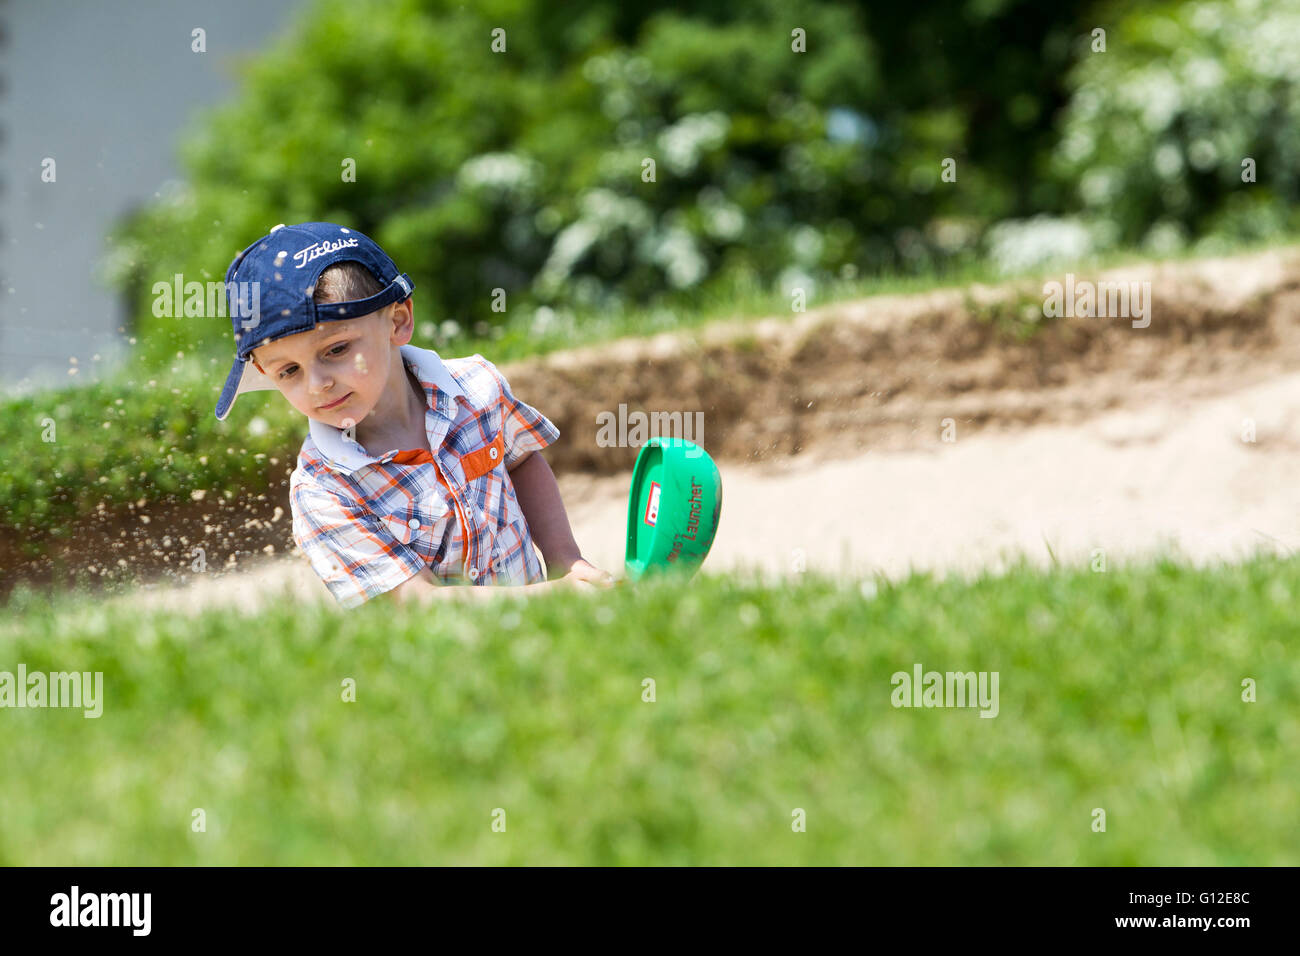 young boy playing golf Stock Photo